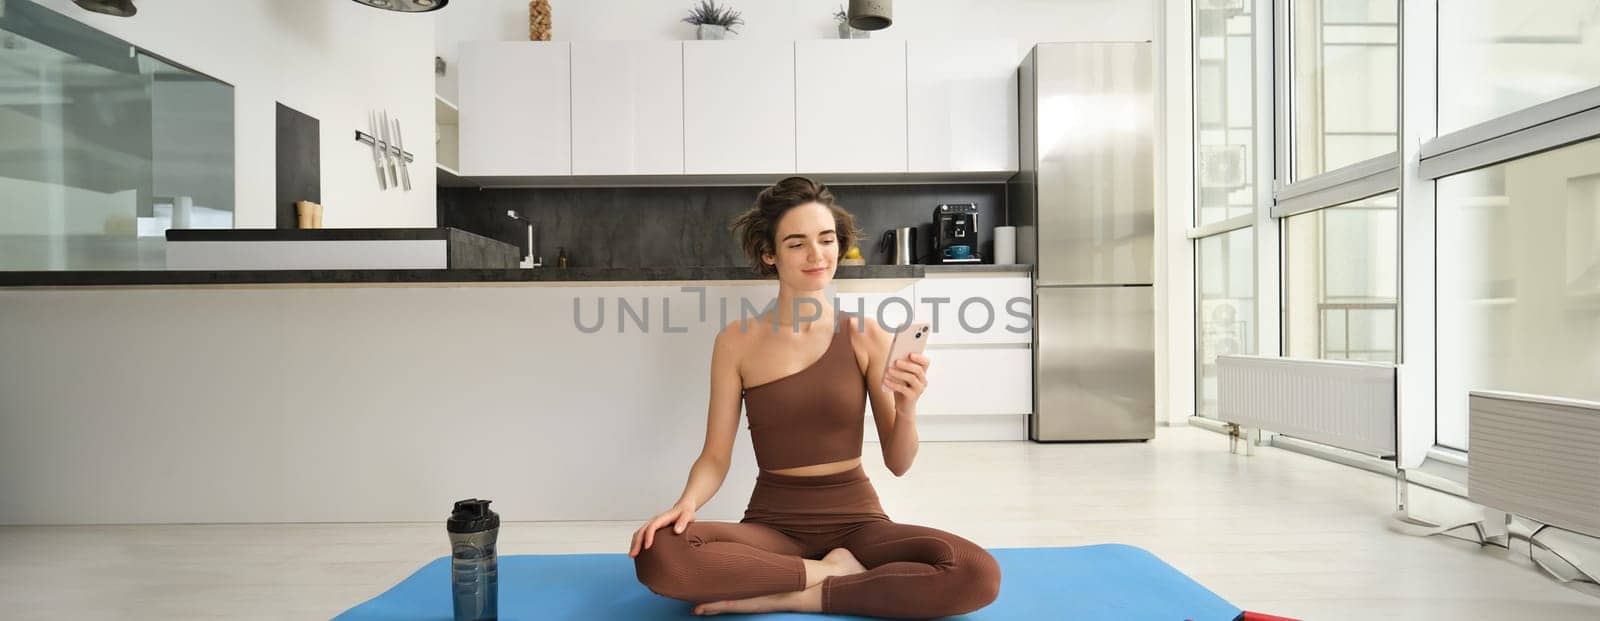 Sport app and wellbeing. Young woman, athlete sitting on floor at home with smartphone, doing yoga, using workout app on mobile phone, doing exercises at home. Copy space